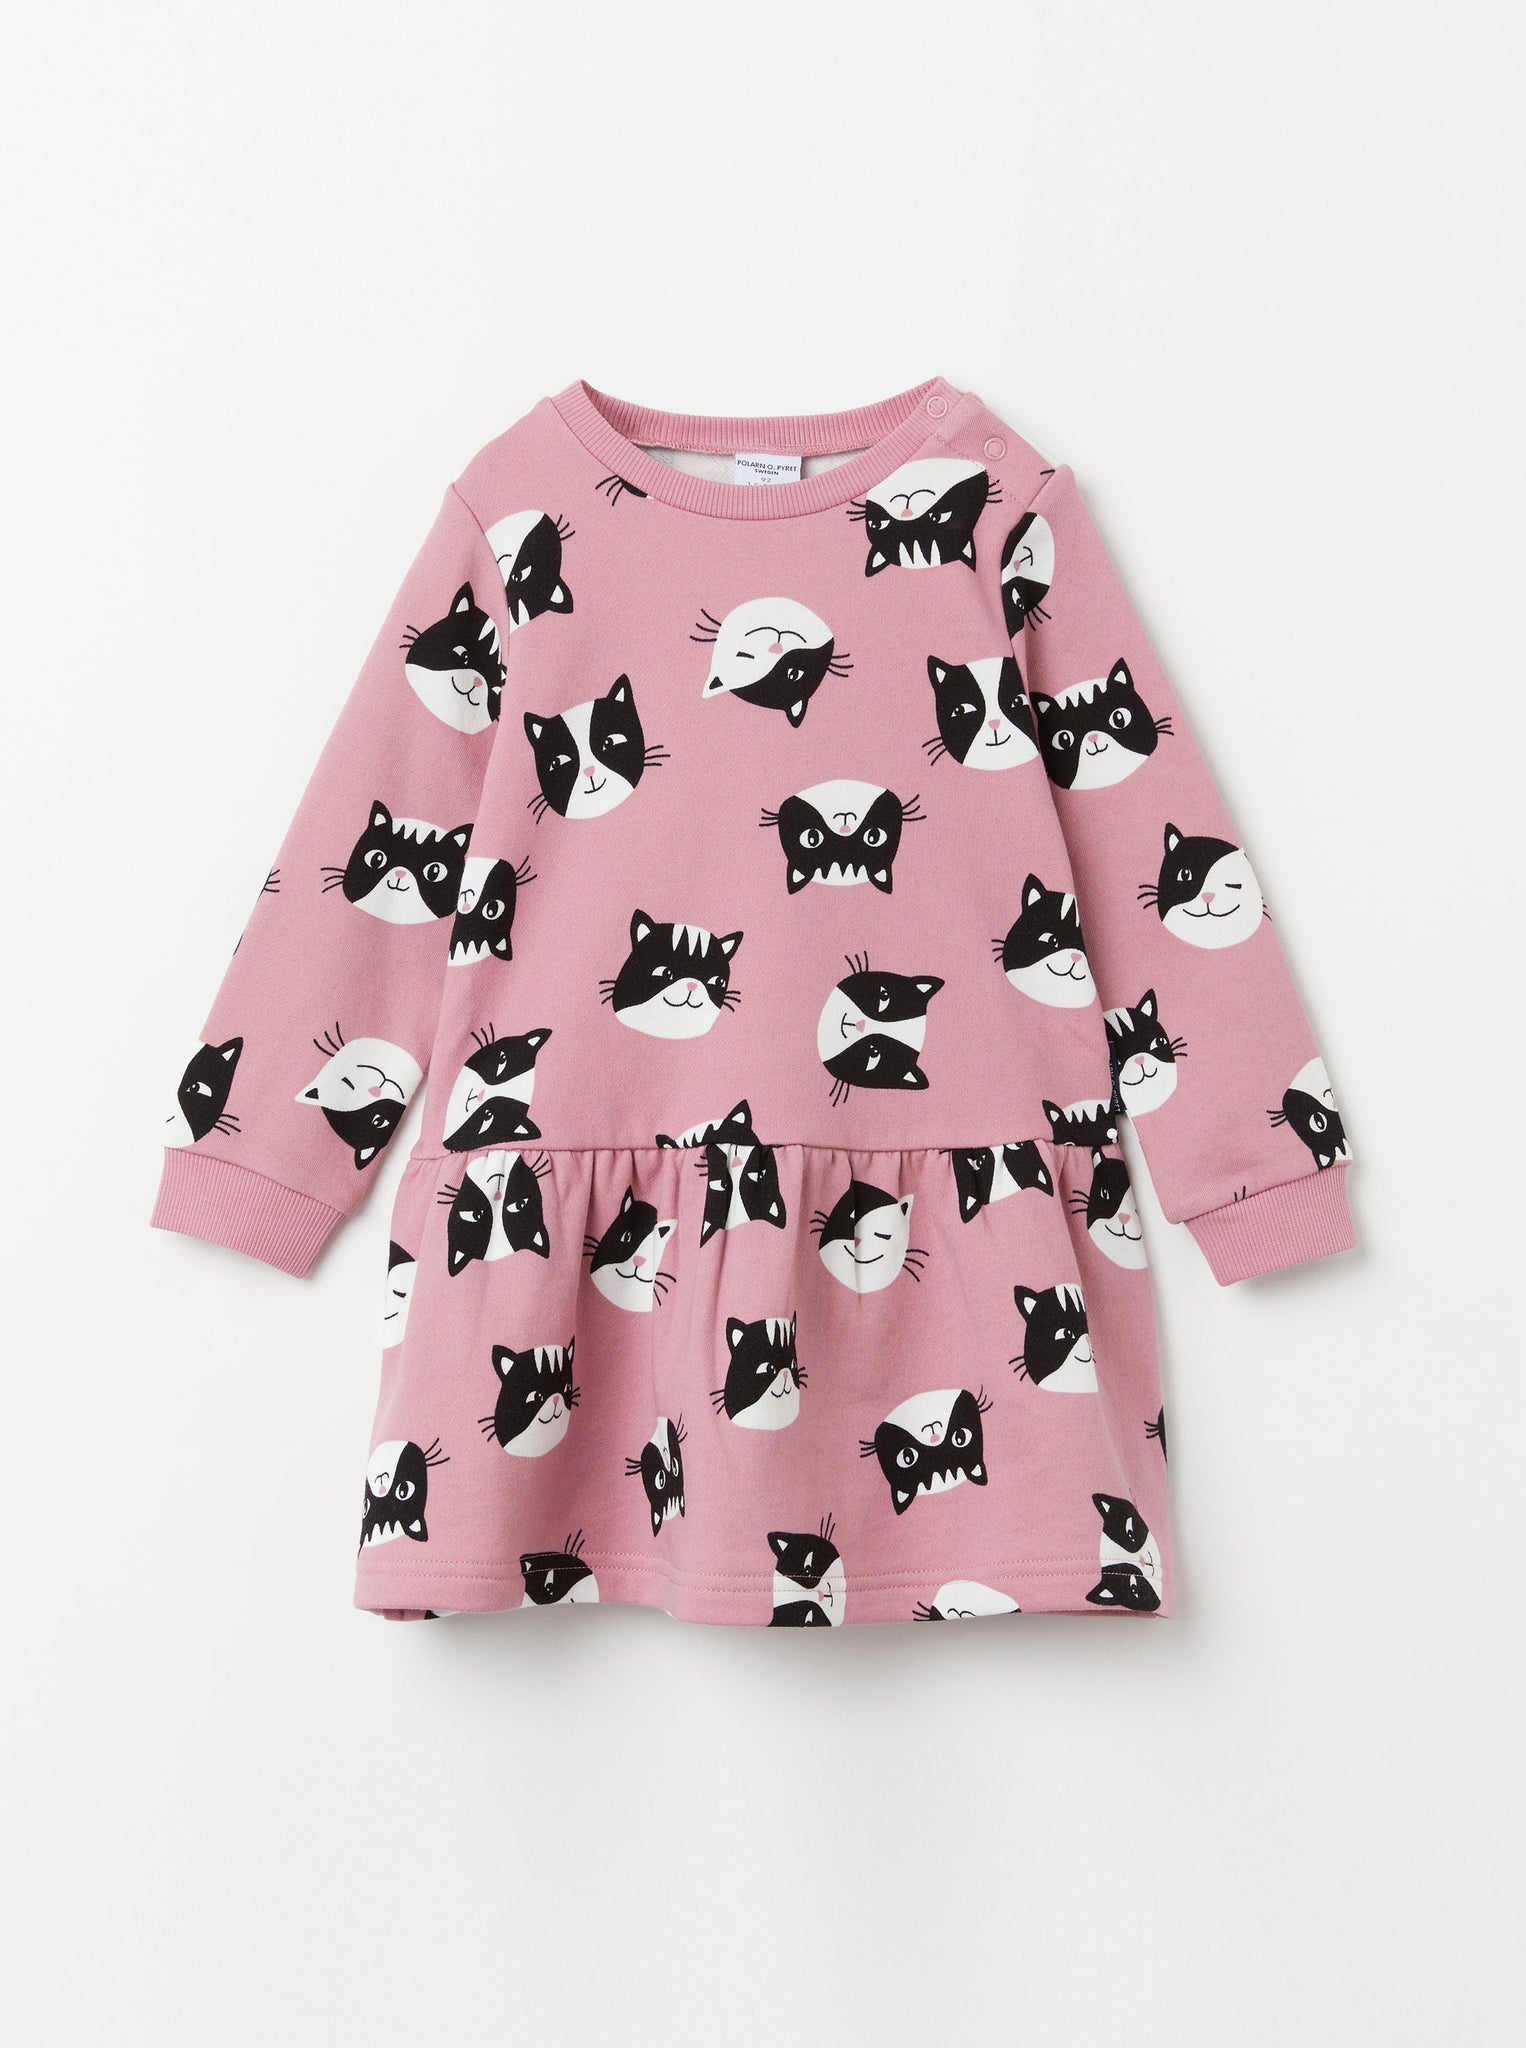 Organic Cotton Cat Print Kids Dress from the Polarn O. Pyret Kidswear collection. Nordic kids clothes made from sustainable sources.